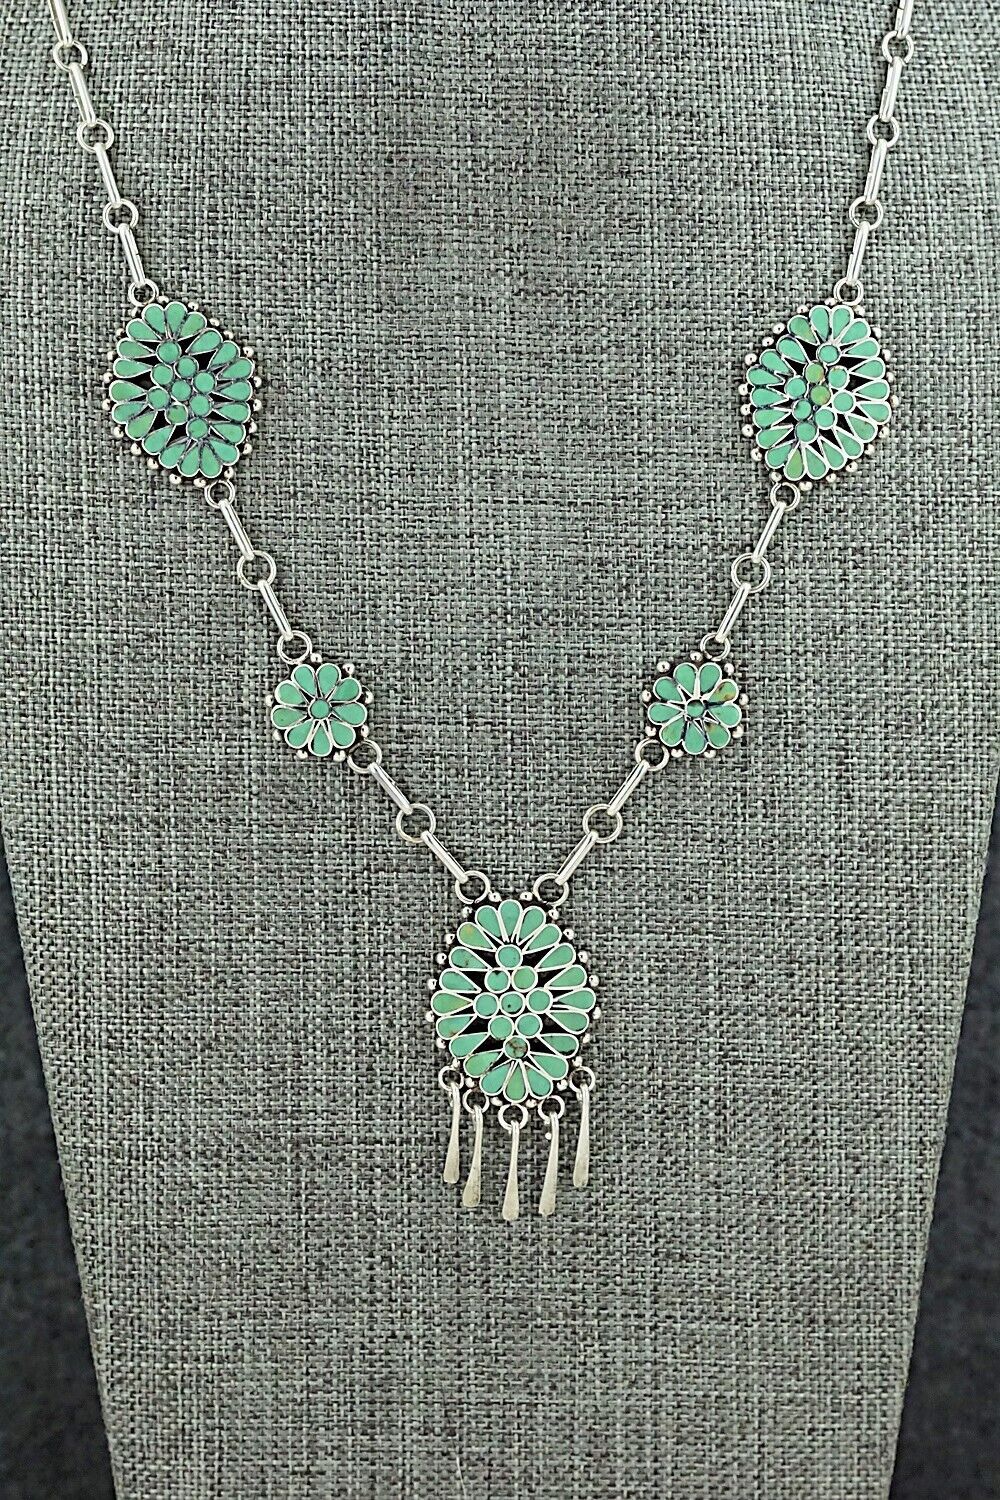 Turquoise & Sterling Silver Inlay Necklace - Michelle Peina